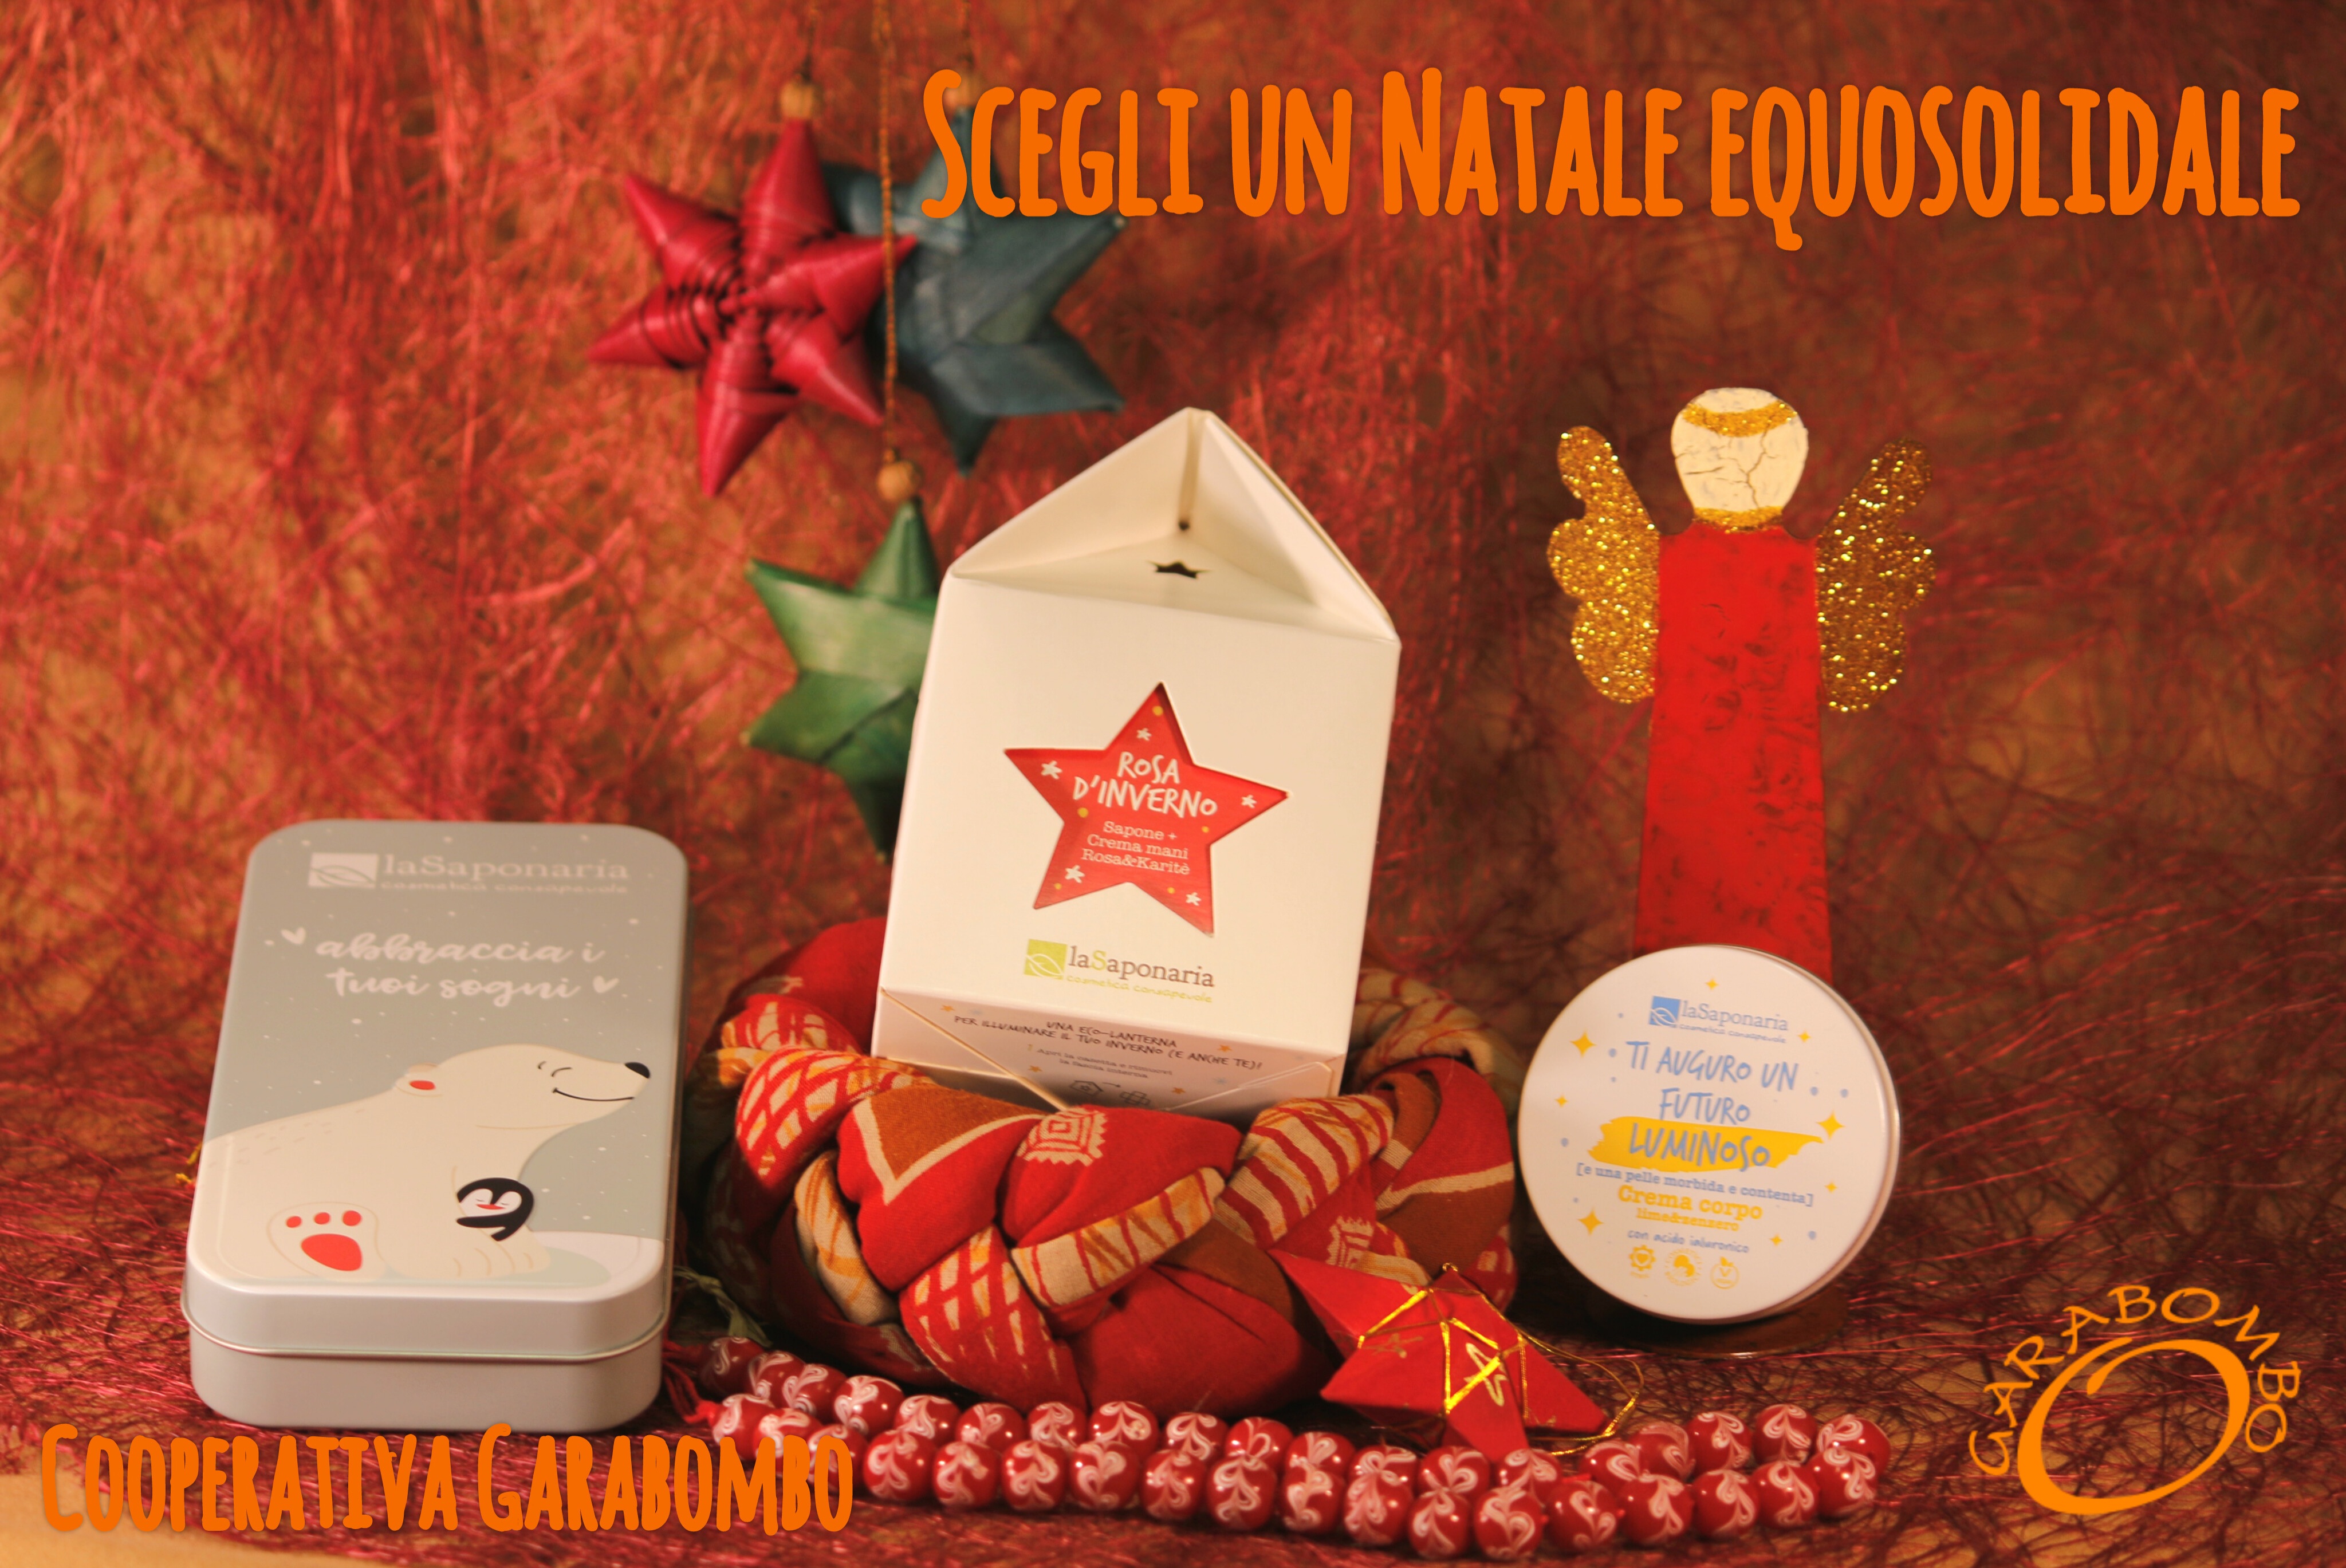 Natale solidale 